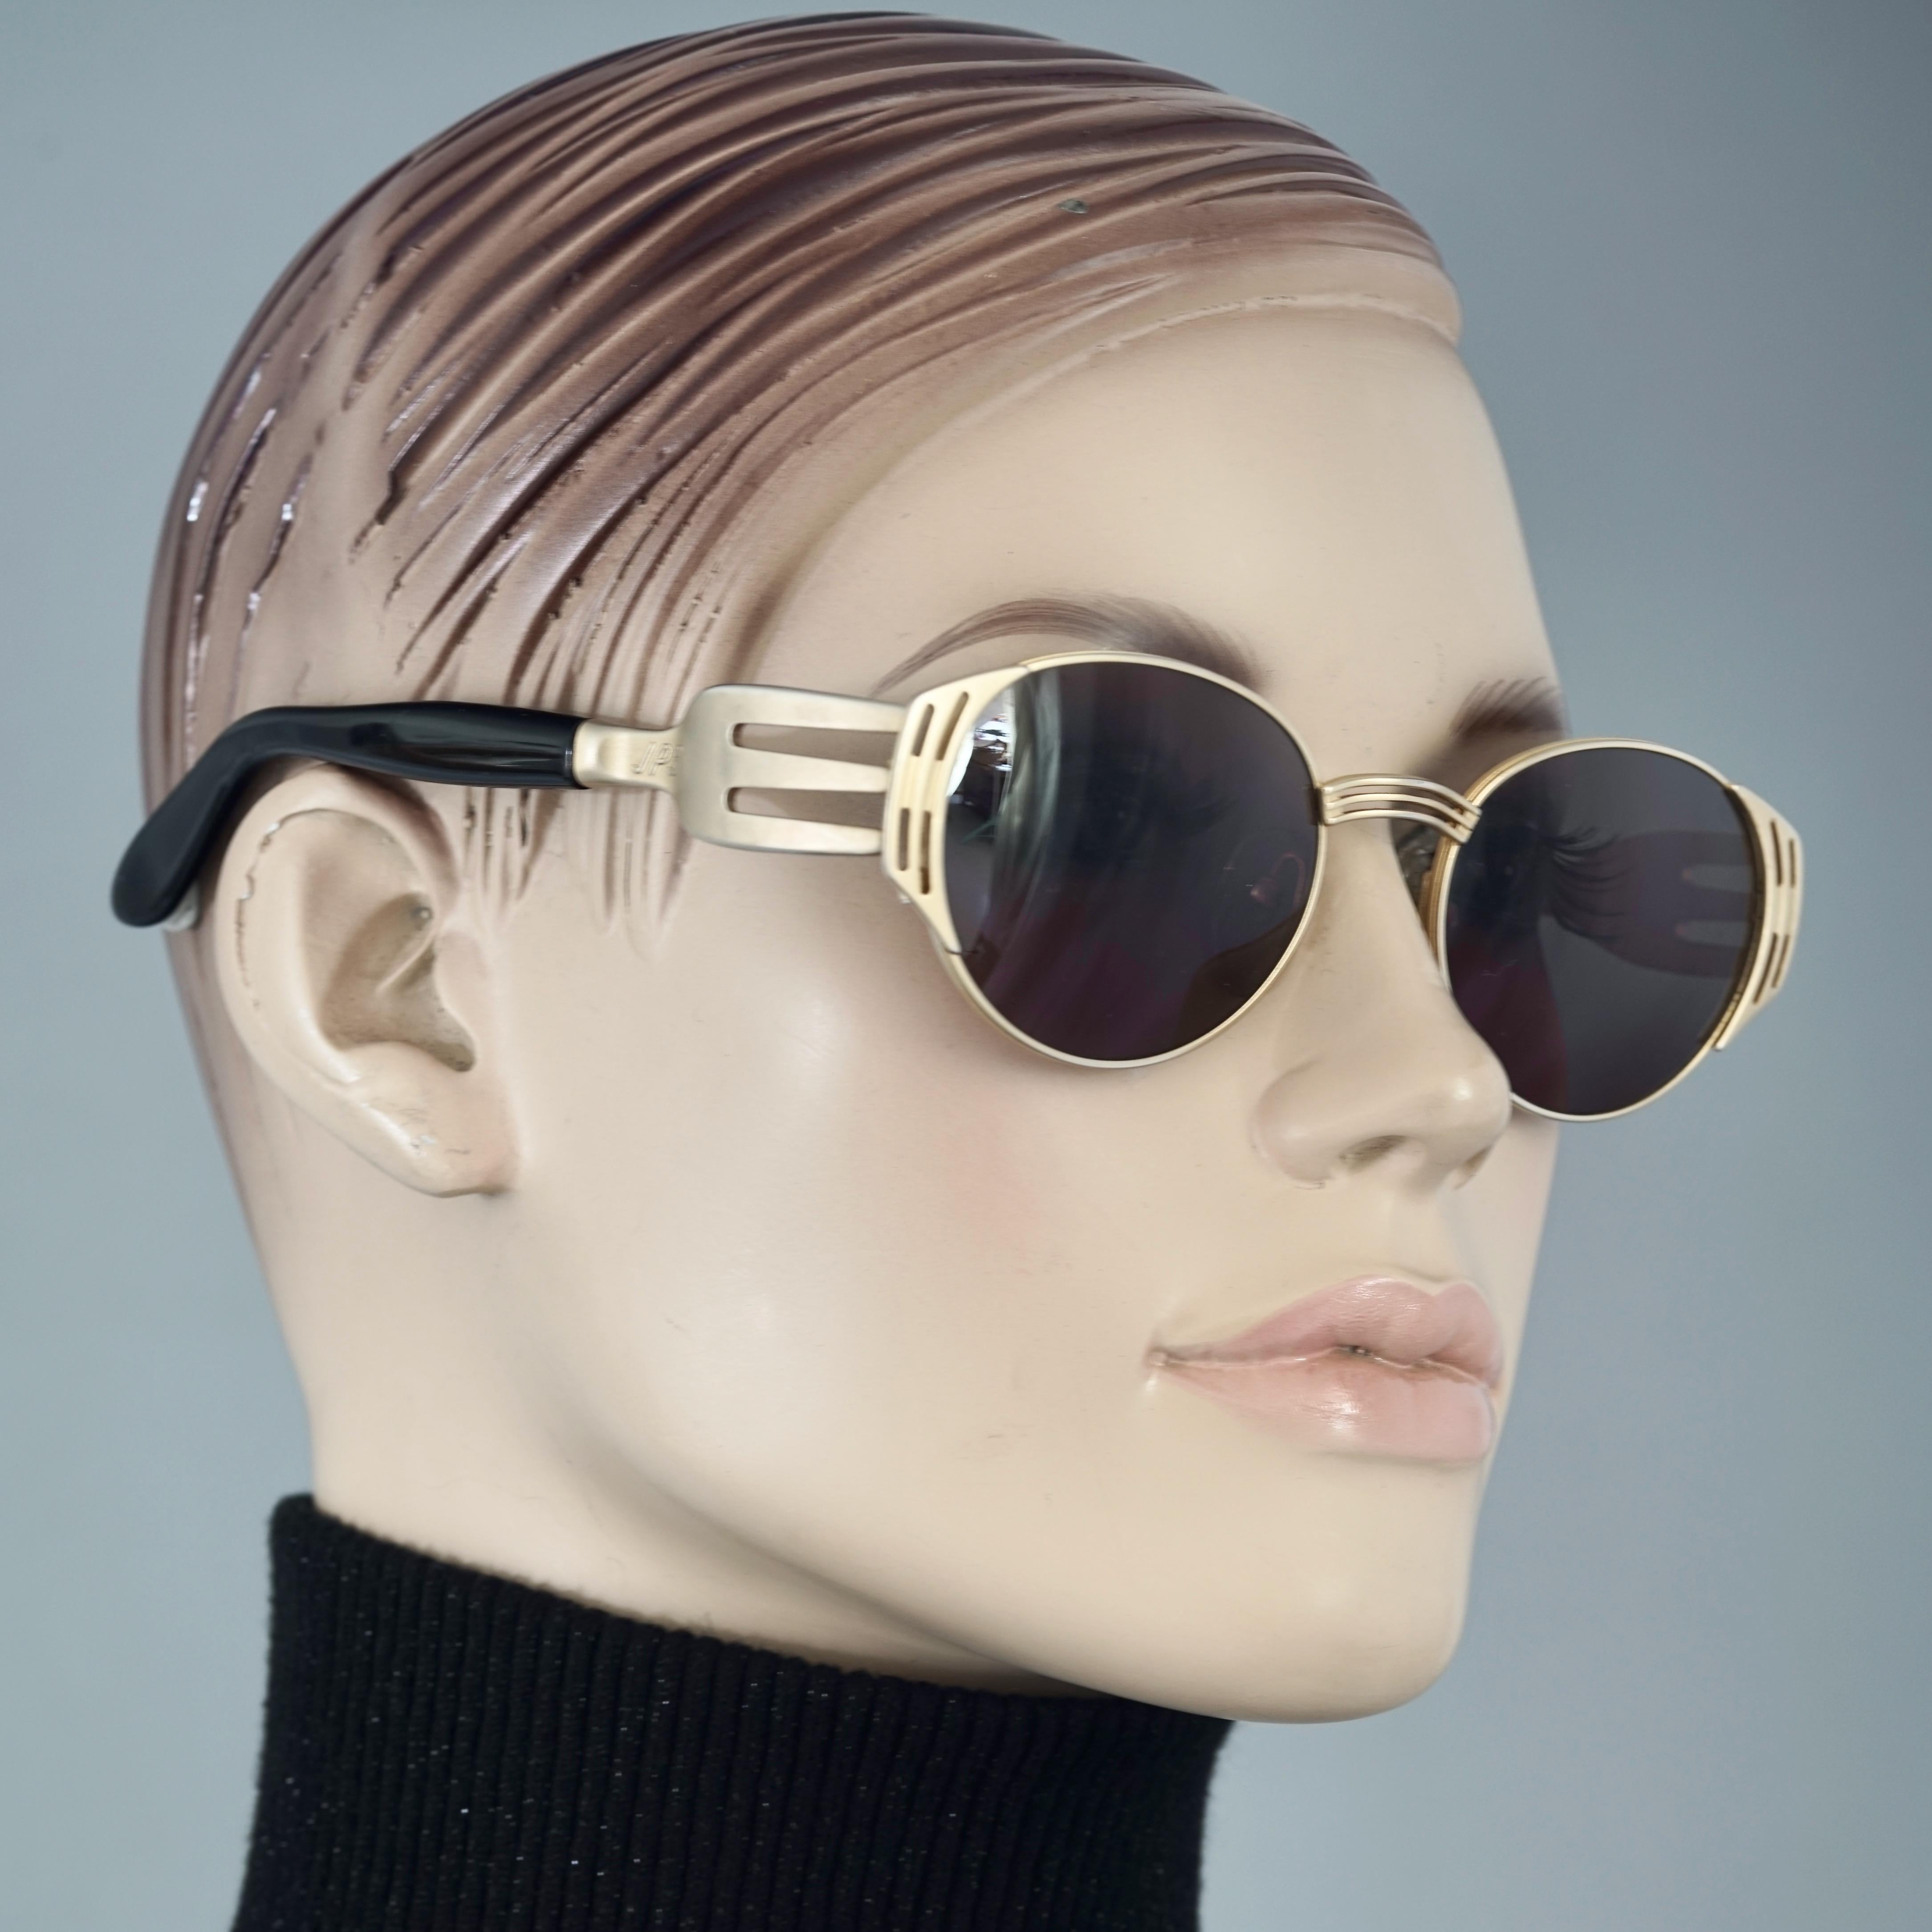 Vintage JEAN PAUL GAULTIER Fork Novelty Sunglasses

Measurements:
Height: 1.77 inches (4.5 cm)
Horizontal Width: 5.31 inches (13.5 cm)
Arms: 5.62 inches (14.3 cm)

Features:
- 100% Authentic JEAN PAUL GAULTIER. 
- Fork novelty sunglasses.
- Gold